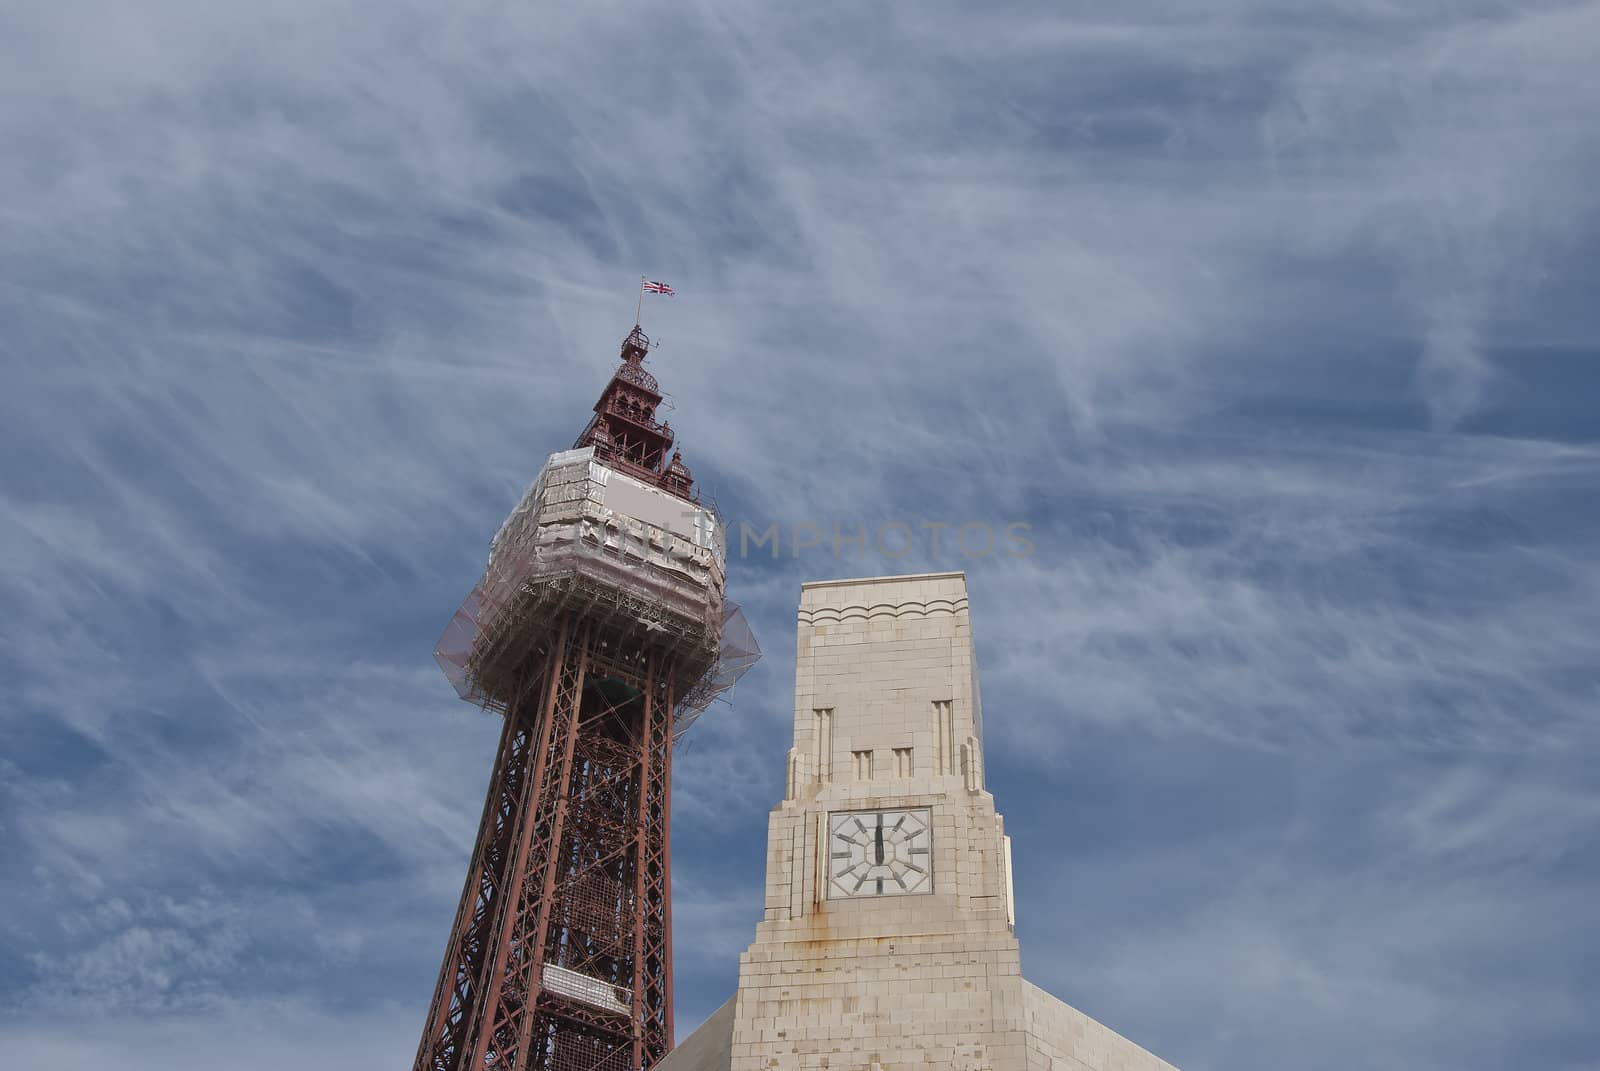 Blackpool Tower and Clocktower by d40xboy